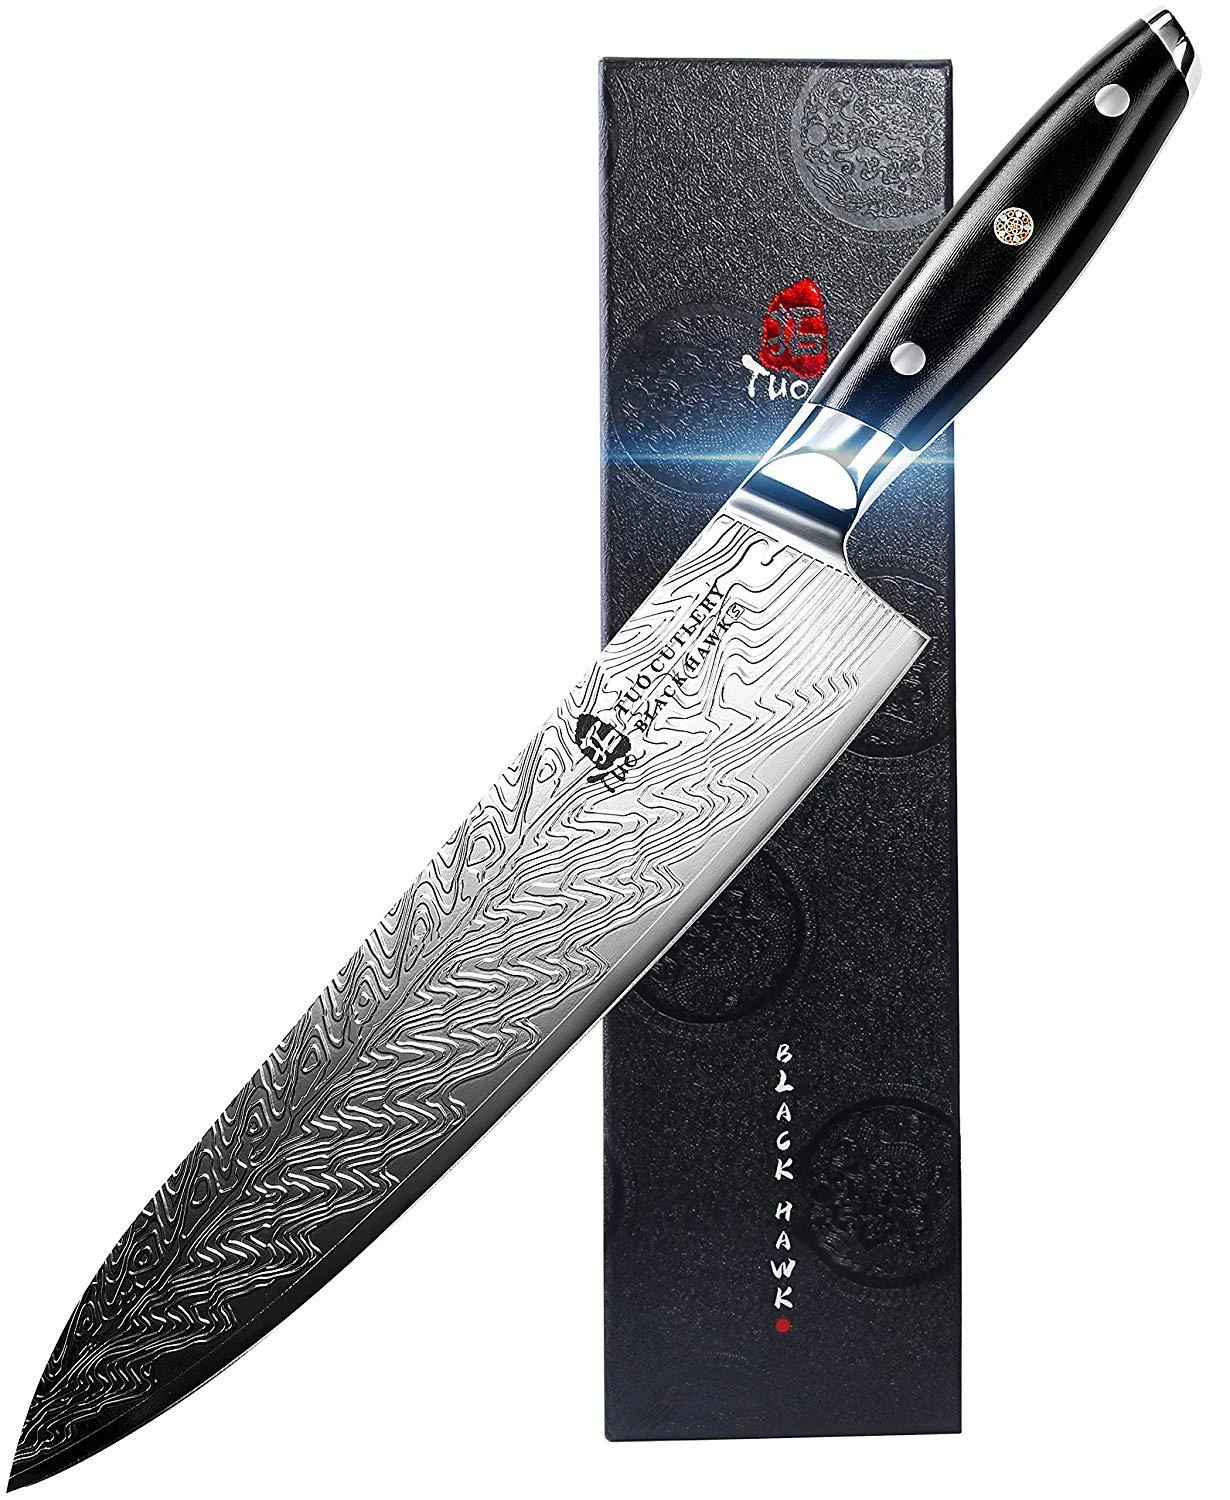 TUO Chef Knife Kitchen Knife 10 inch High Carbon Stainless Steel Pro Chef's  Knife with G10 Full Tang Handle Black Hawk S|Kitchen Knives| - AliExpress